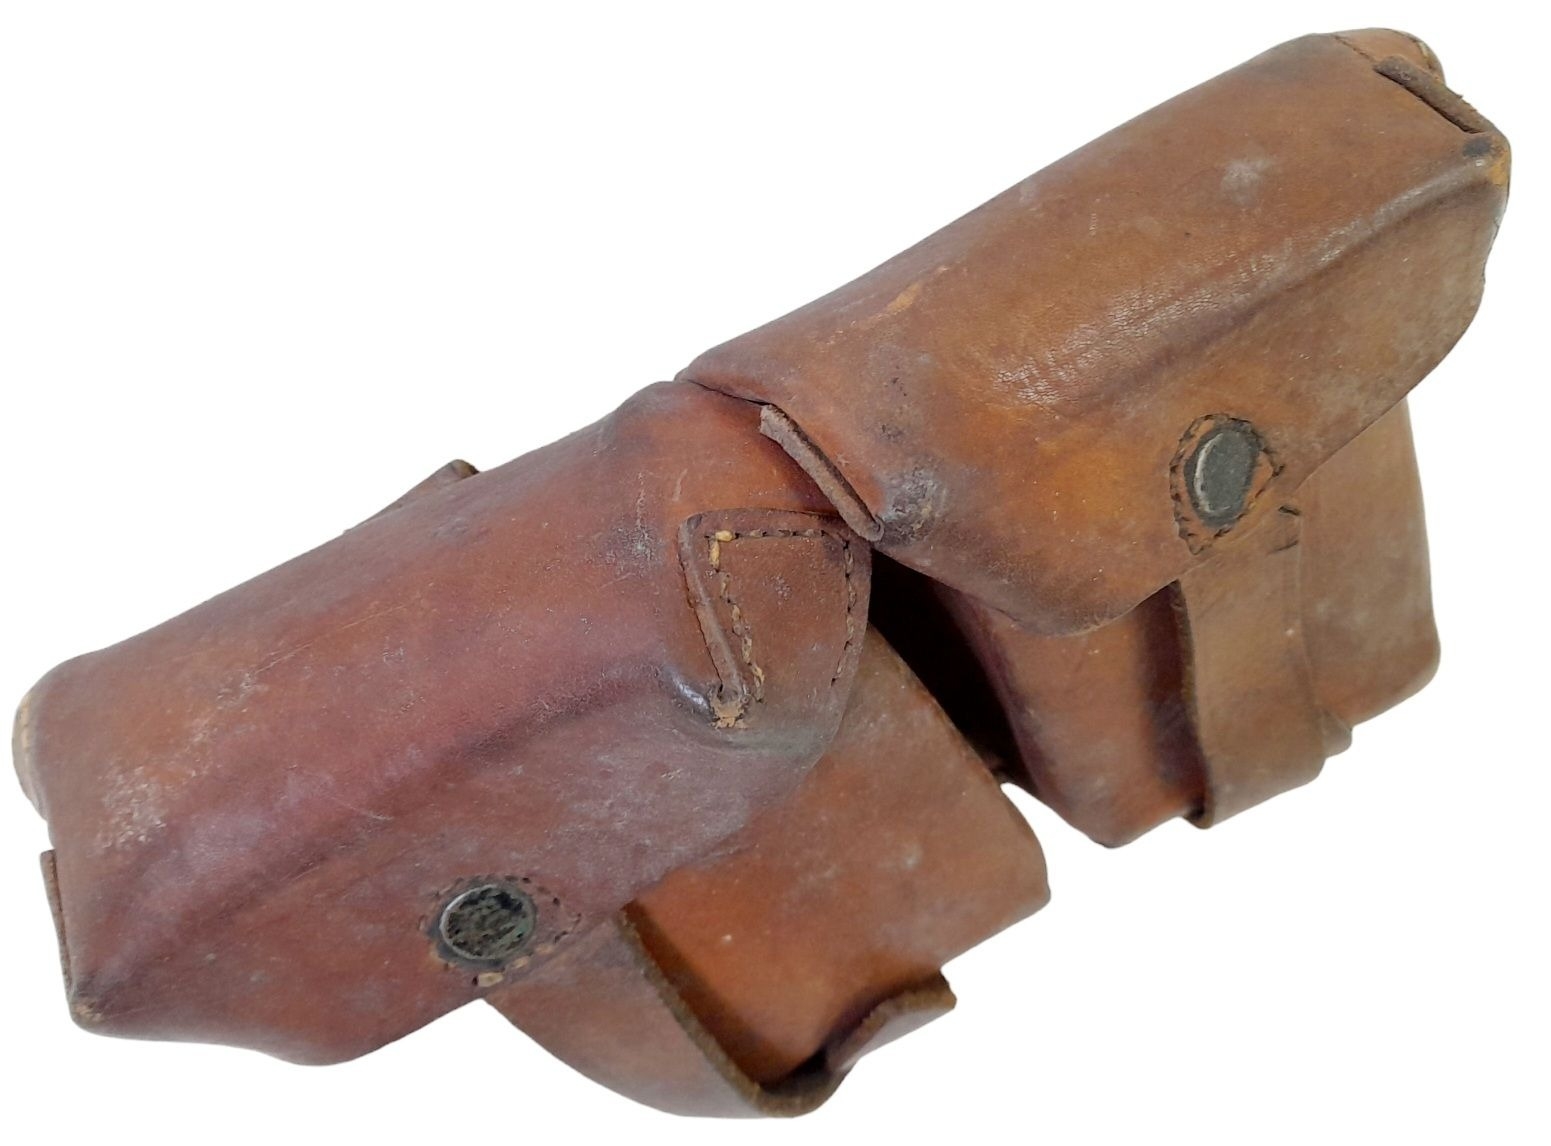 Two WW2 German Ammo Pouches with Four Empty Magazines. Complete with belt attachments. - Image 4 of 6